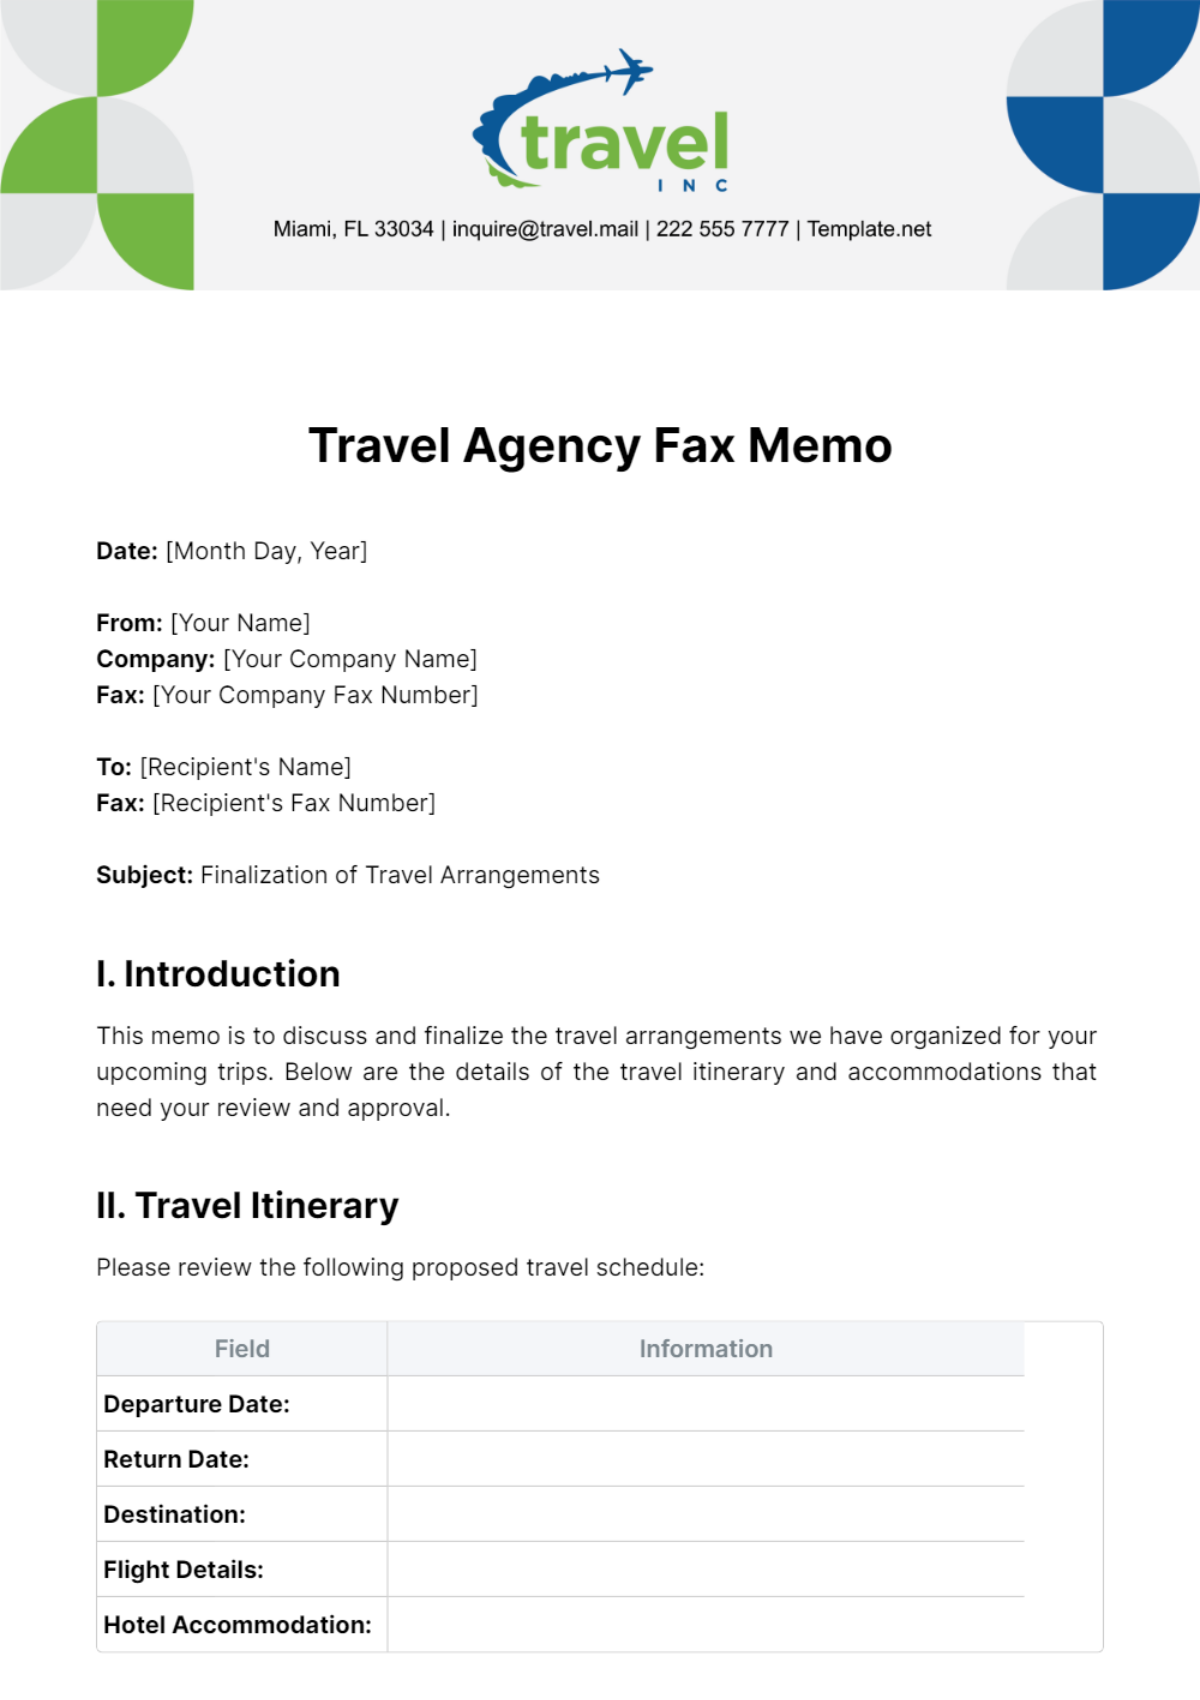 Travel Agency Fax Memo Template